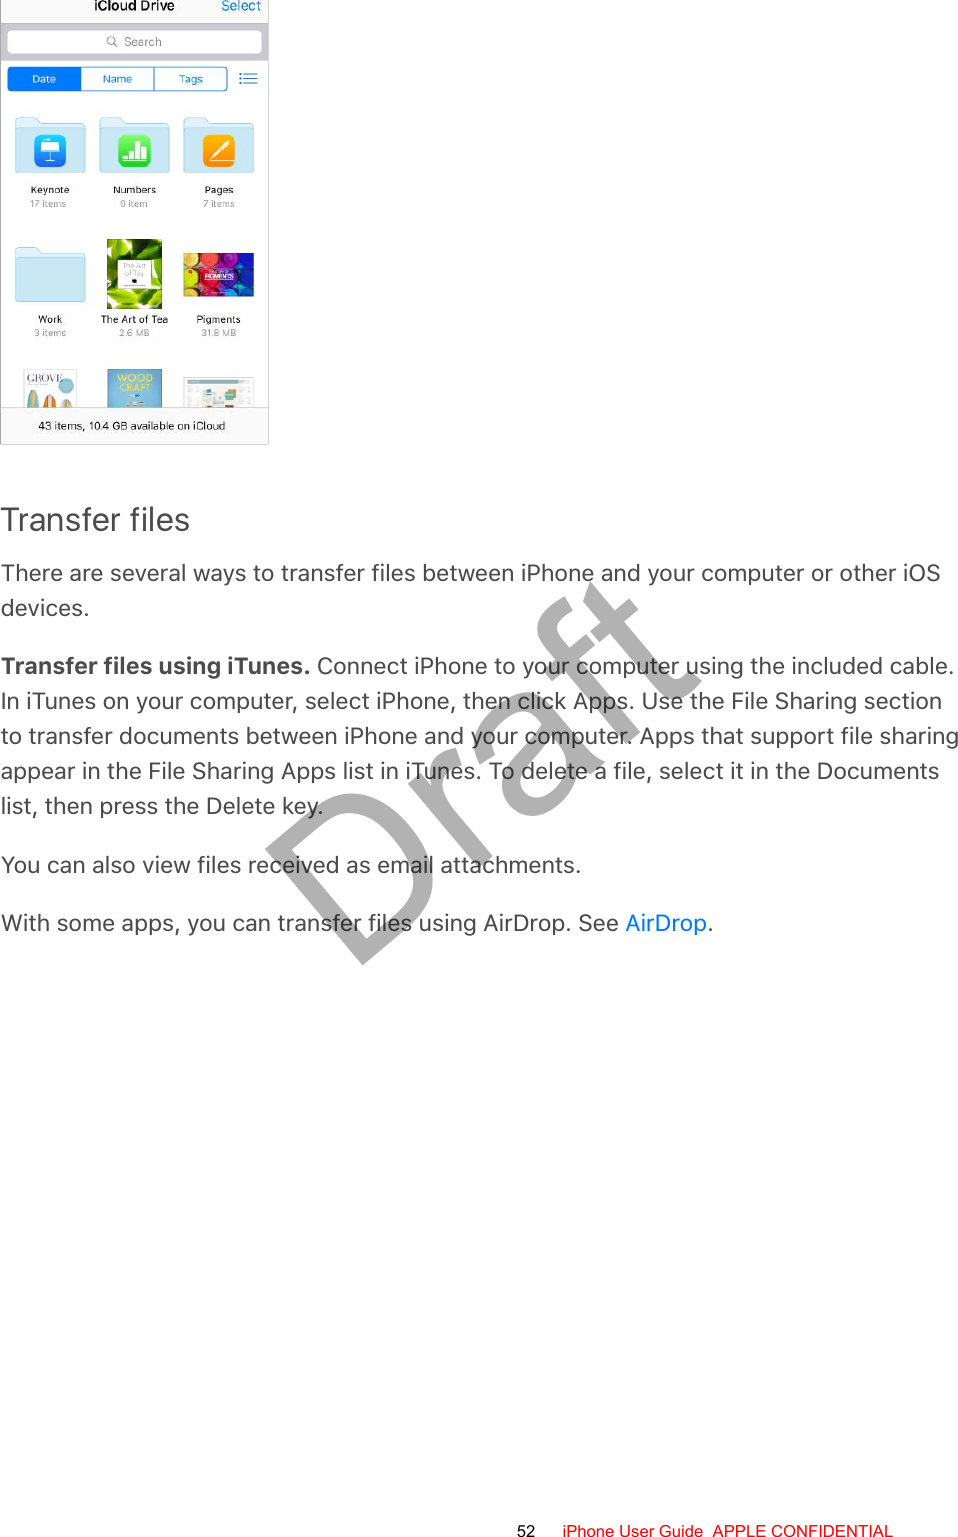 Transfer filesThere are several ways to transfer files between iPhone and your computer or other iOSdevices.Transfer files using iTunes. Connect iPhone to your computer using the included cable.In iTunes on your computer, select iPhone, then click Apps. Use the File Sharing sectionto transfer documents between iPhone and your computer. Apps that support file sharingappear in the File Sharing Apps list in iTunes. To delete a file, select it in the Documentslist, then press the Delete key.You can also view files received as email attachments.With some apps, you can transfer files using AirDrop. See  .AirDrop52 iPhone User Guide  APPLE CONFIDENTIALDraft